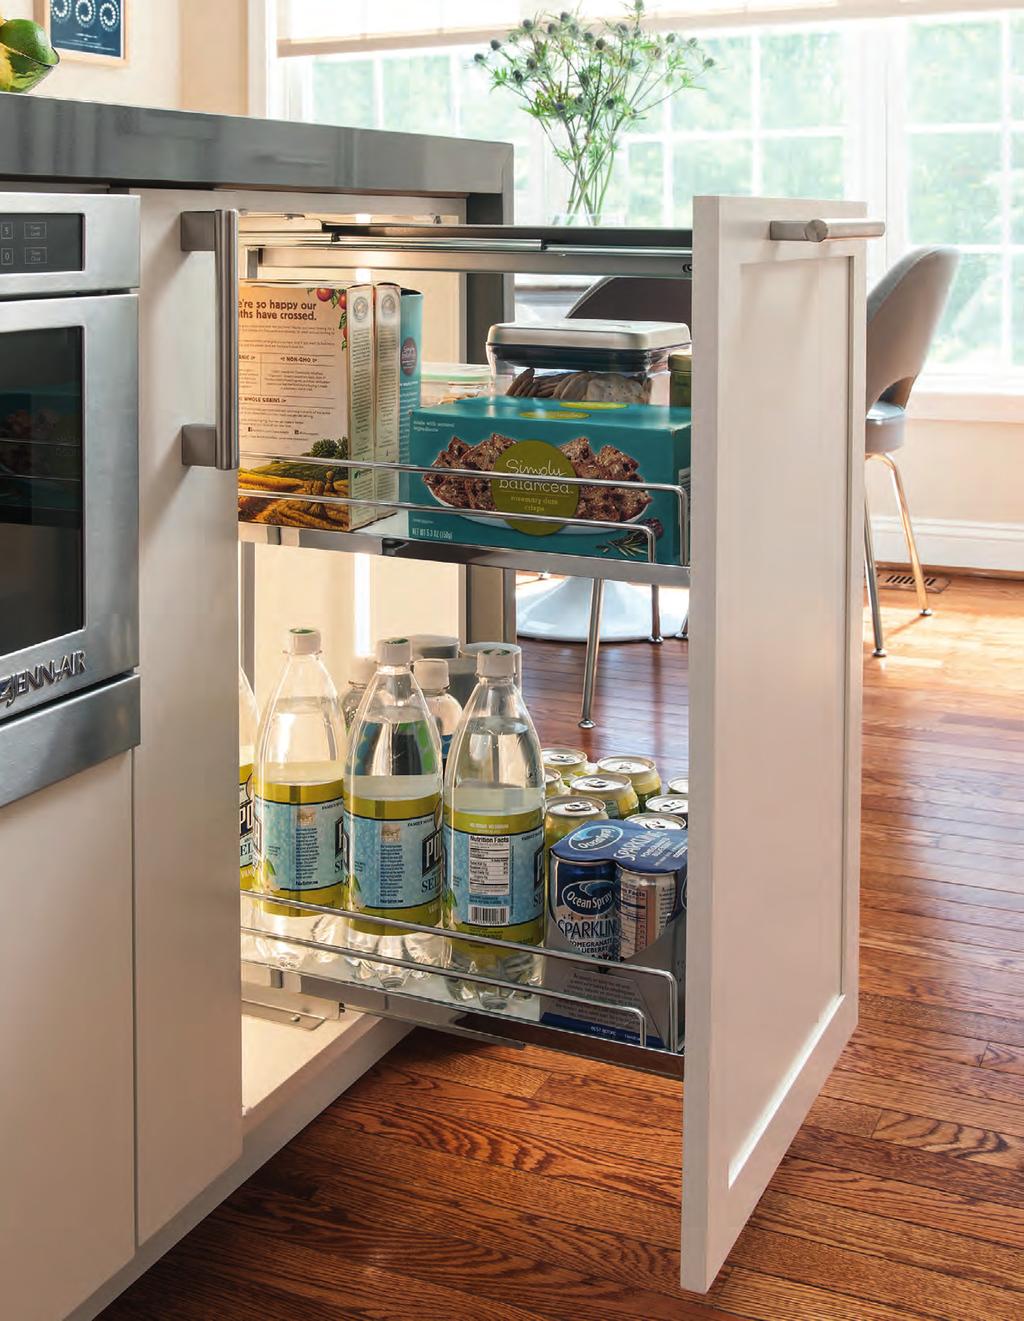 order, space and transparency into every base cabinet!